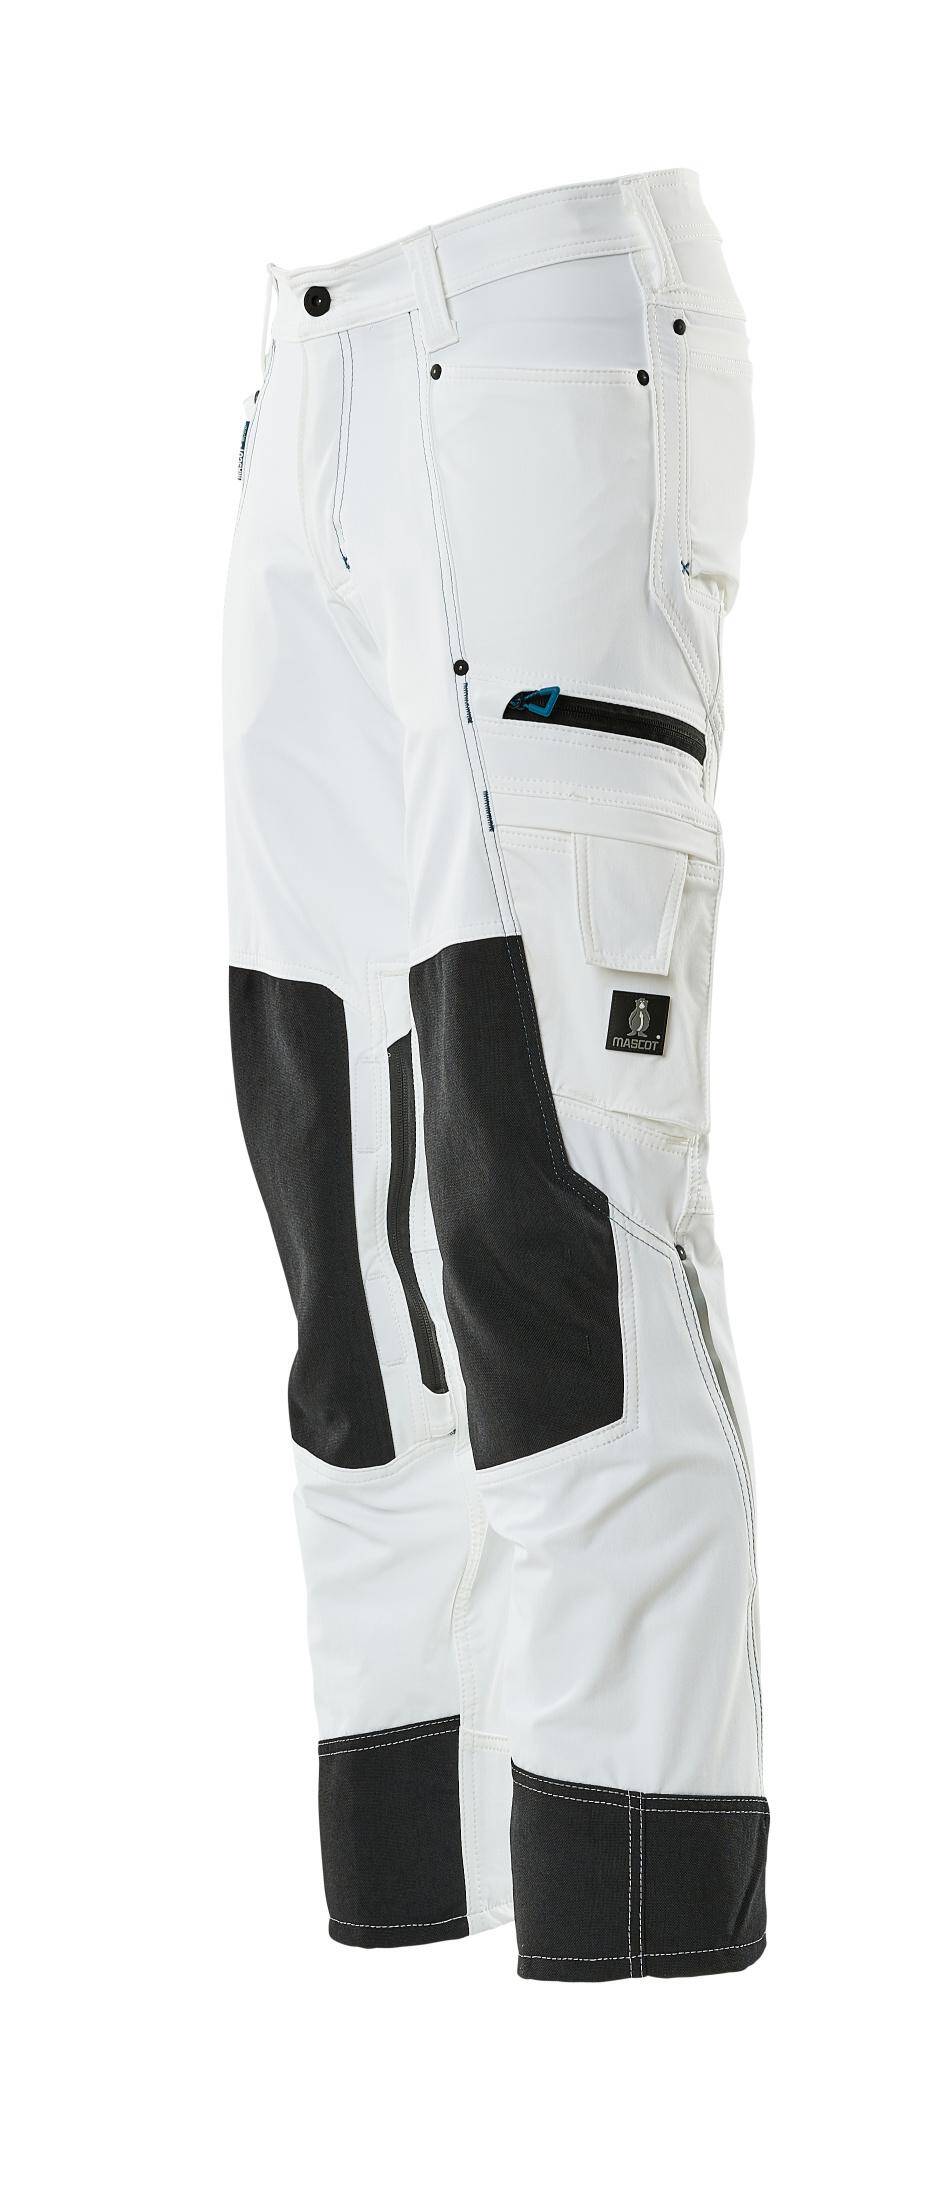 Trousers with kneepad pockets Advanced white (Photo 1)